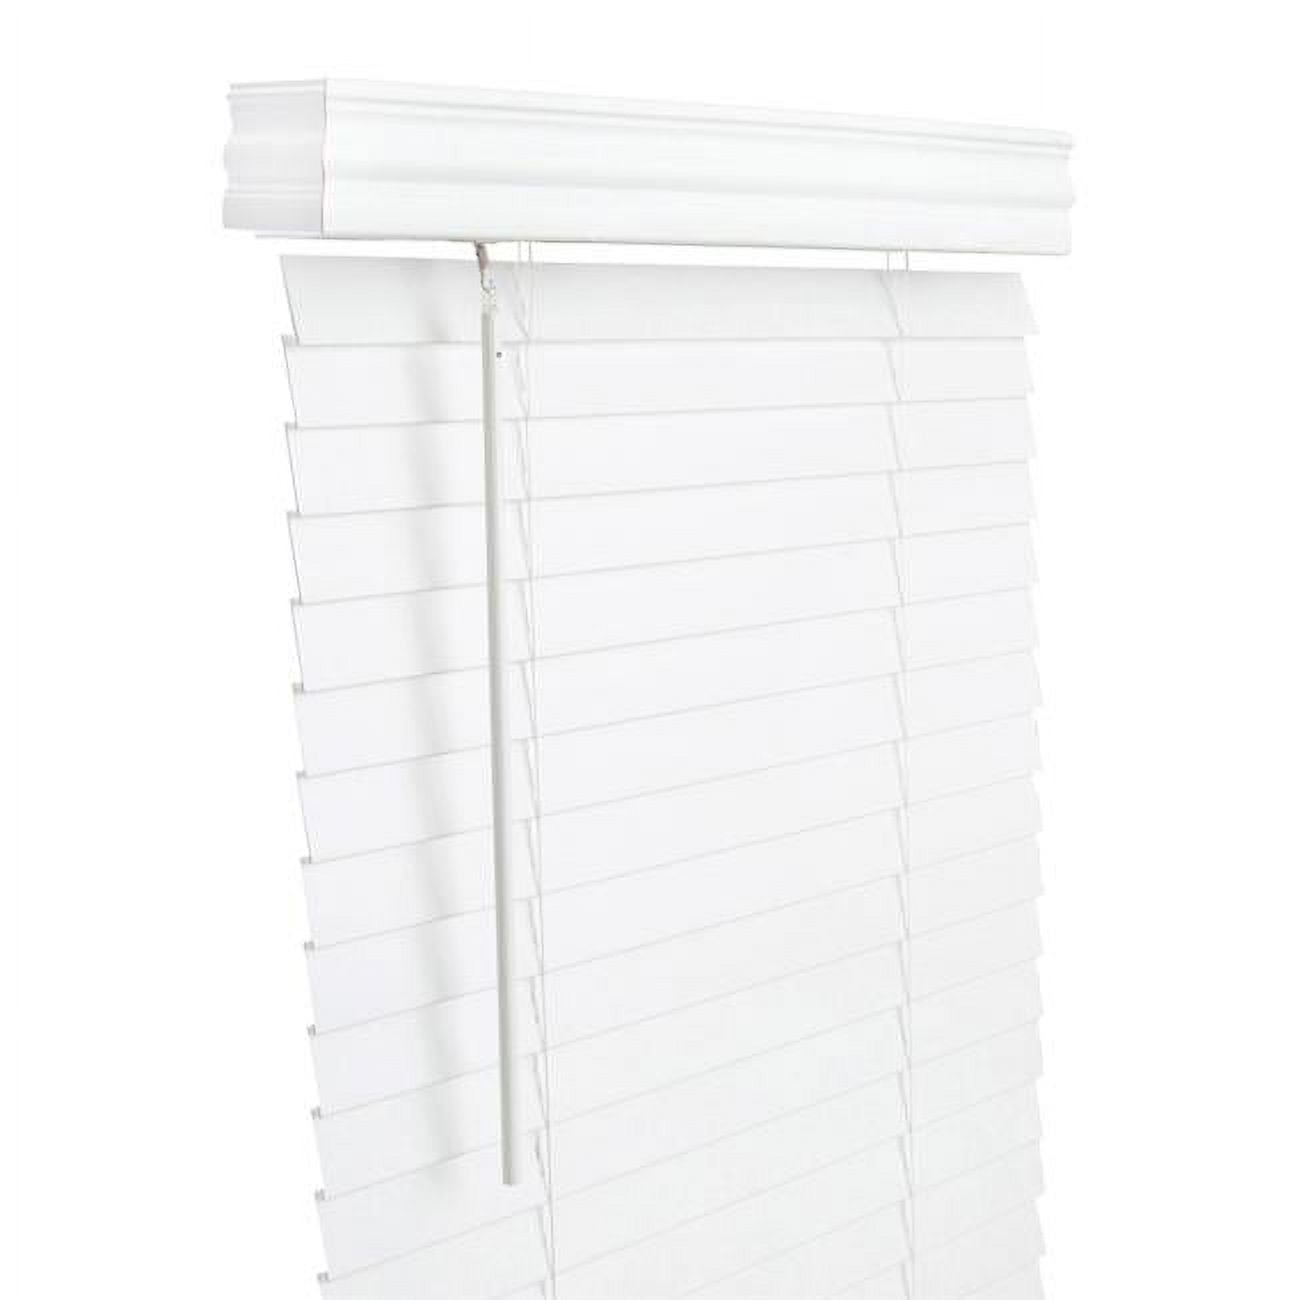 5005754 Faux Wood 2 In. Cordless Mini-blinds, 31 X 60 In. - White